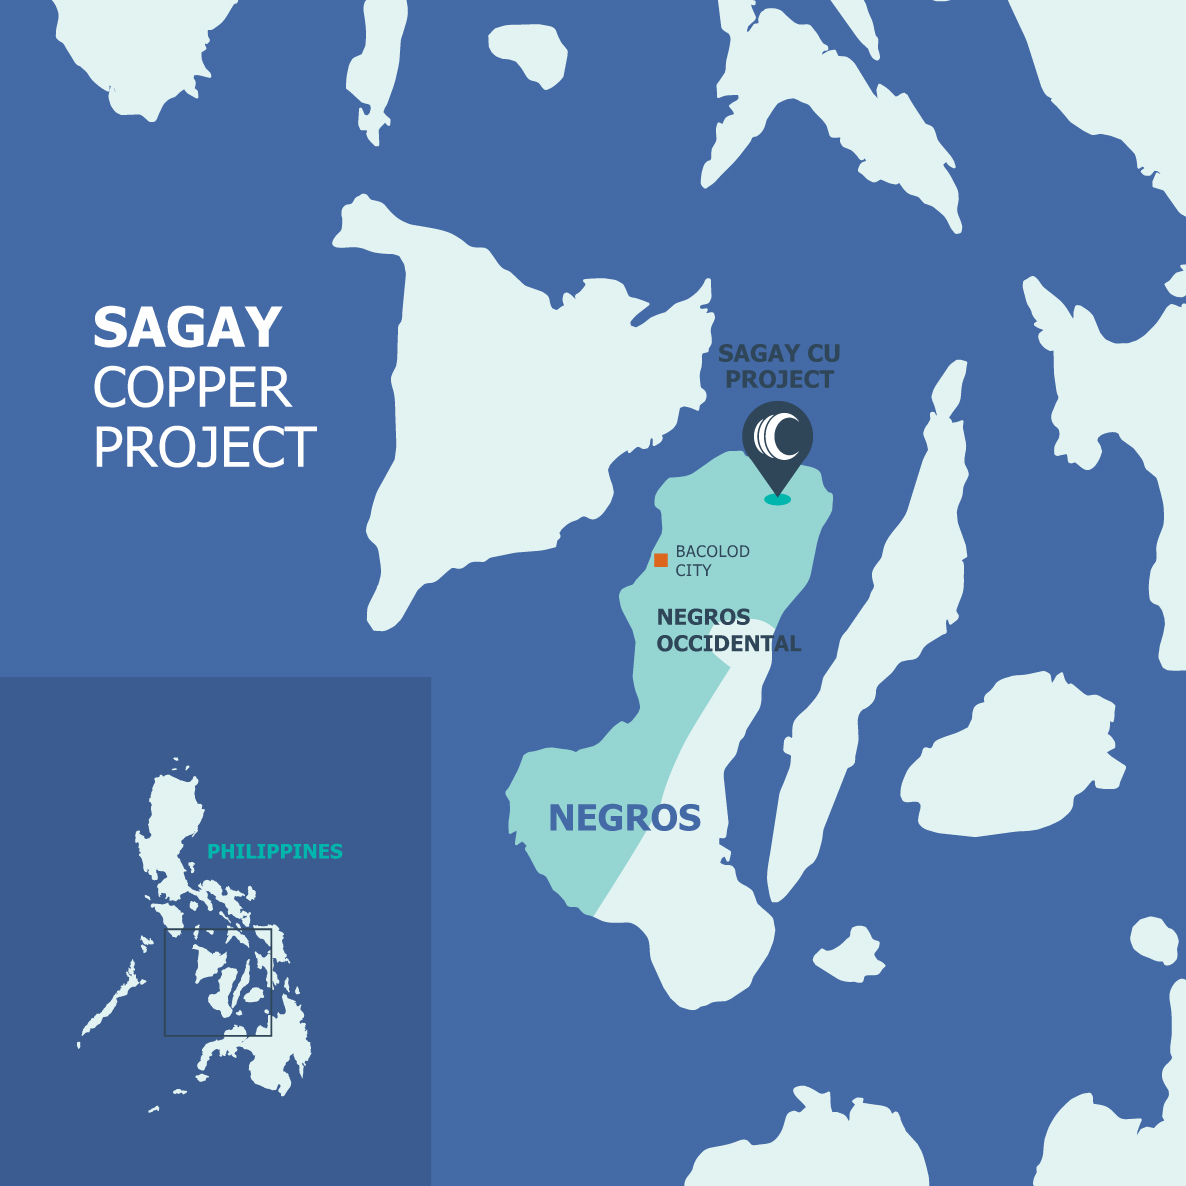 Royalty agreement secured at Sagay project